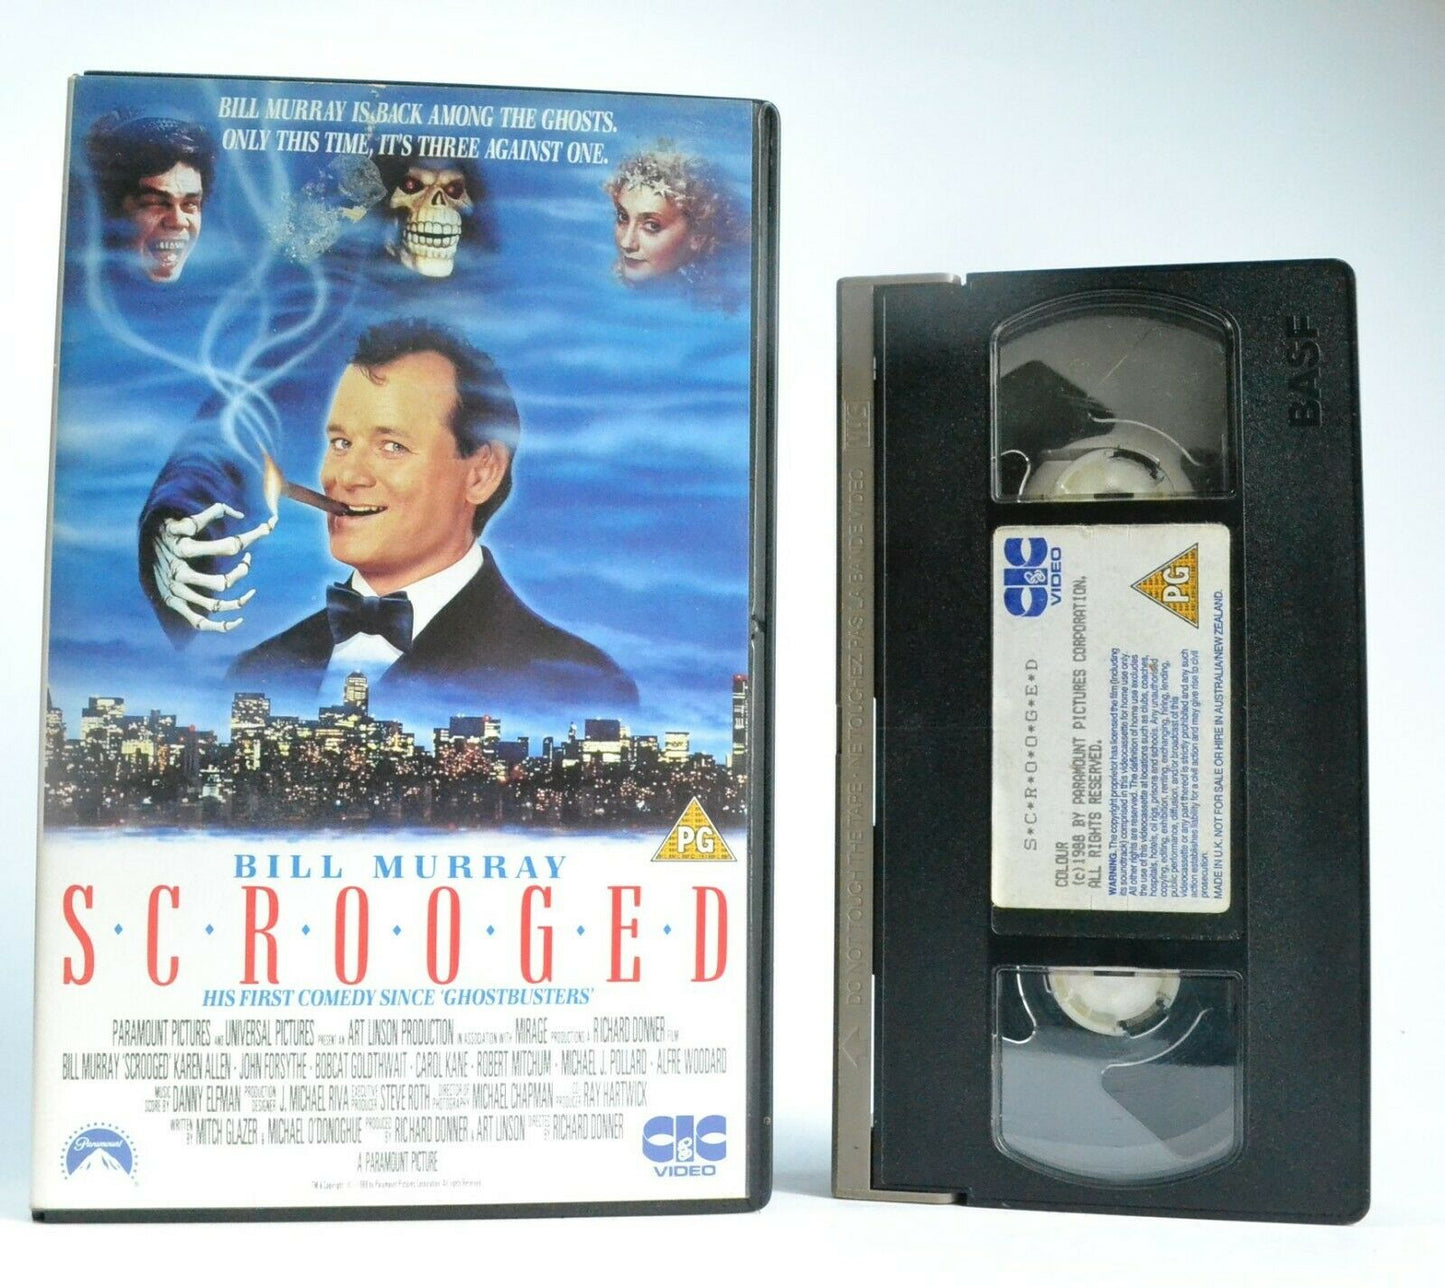 Scrooged (1988): Based On C.Dickens Novel - Christmas Comedy - Bill Murray - VHS-